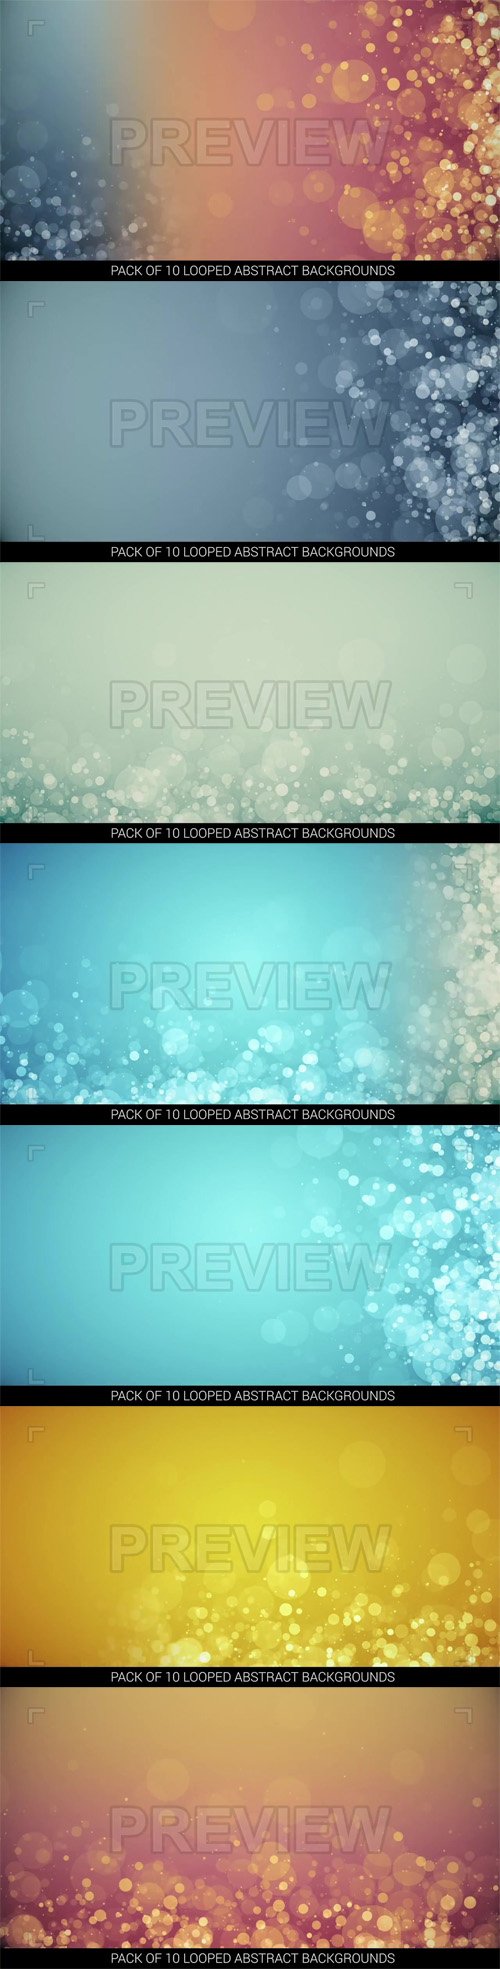 10 Looped Abstract Backgrounds